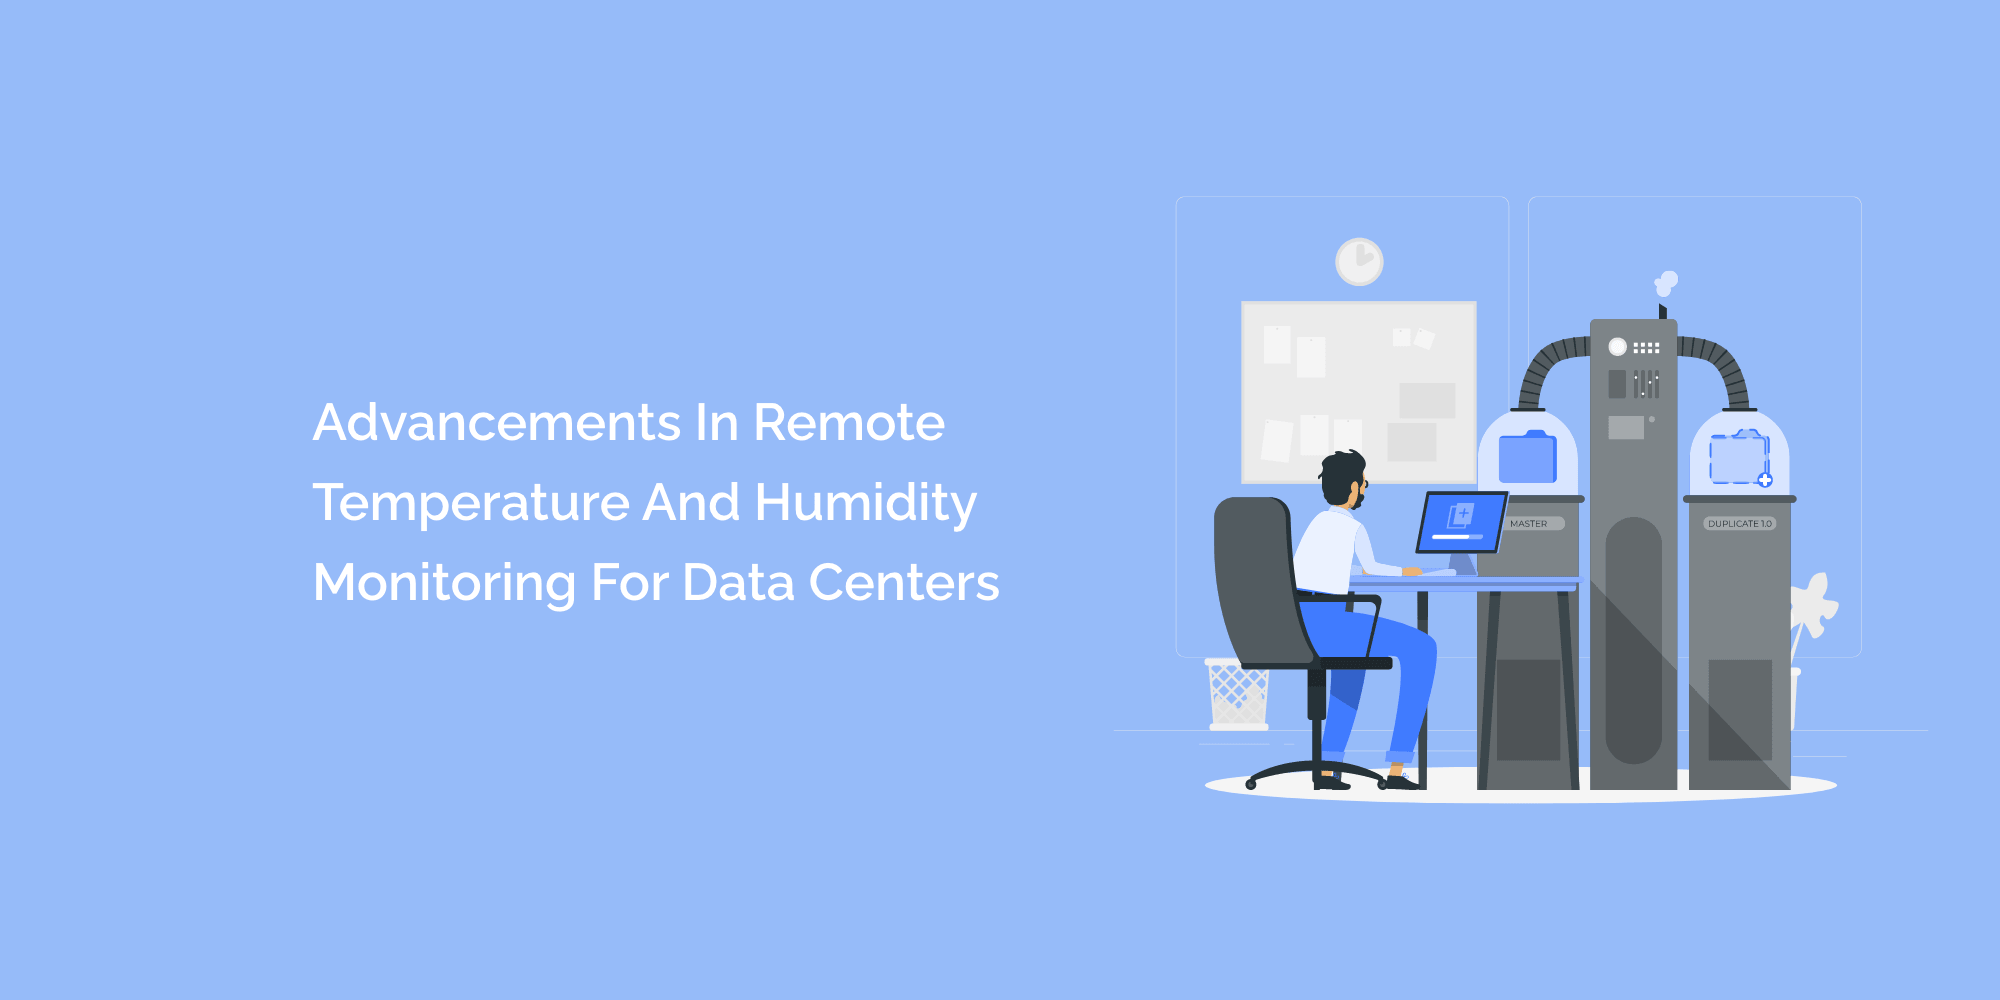 Advancements in Remote Temperature and Humidity Monitoring for Data Centers